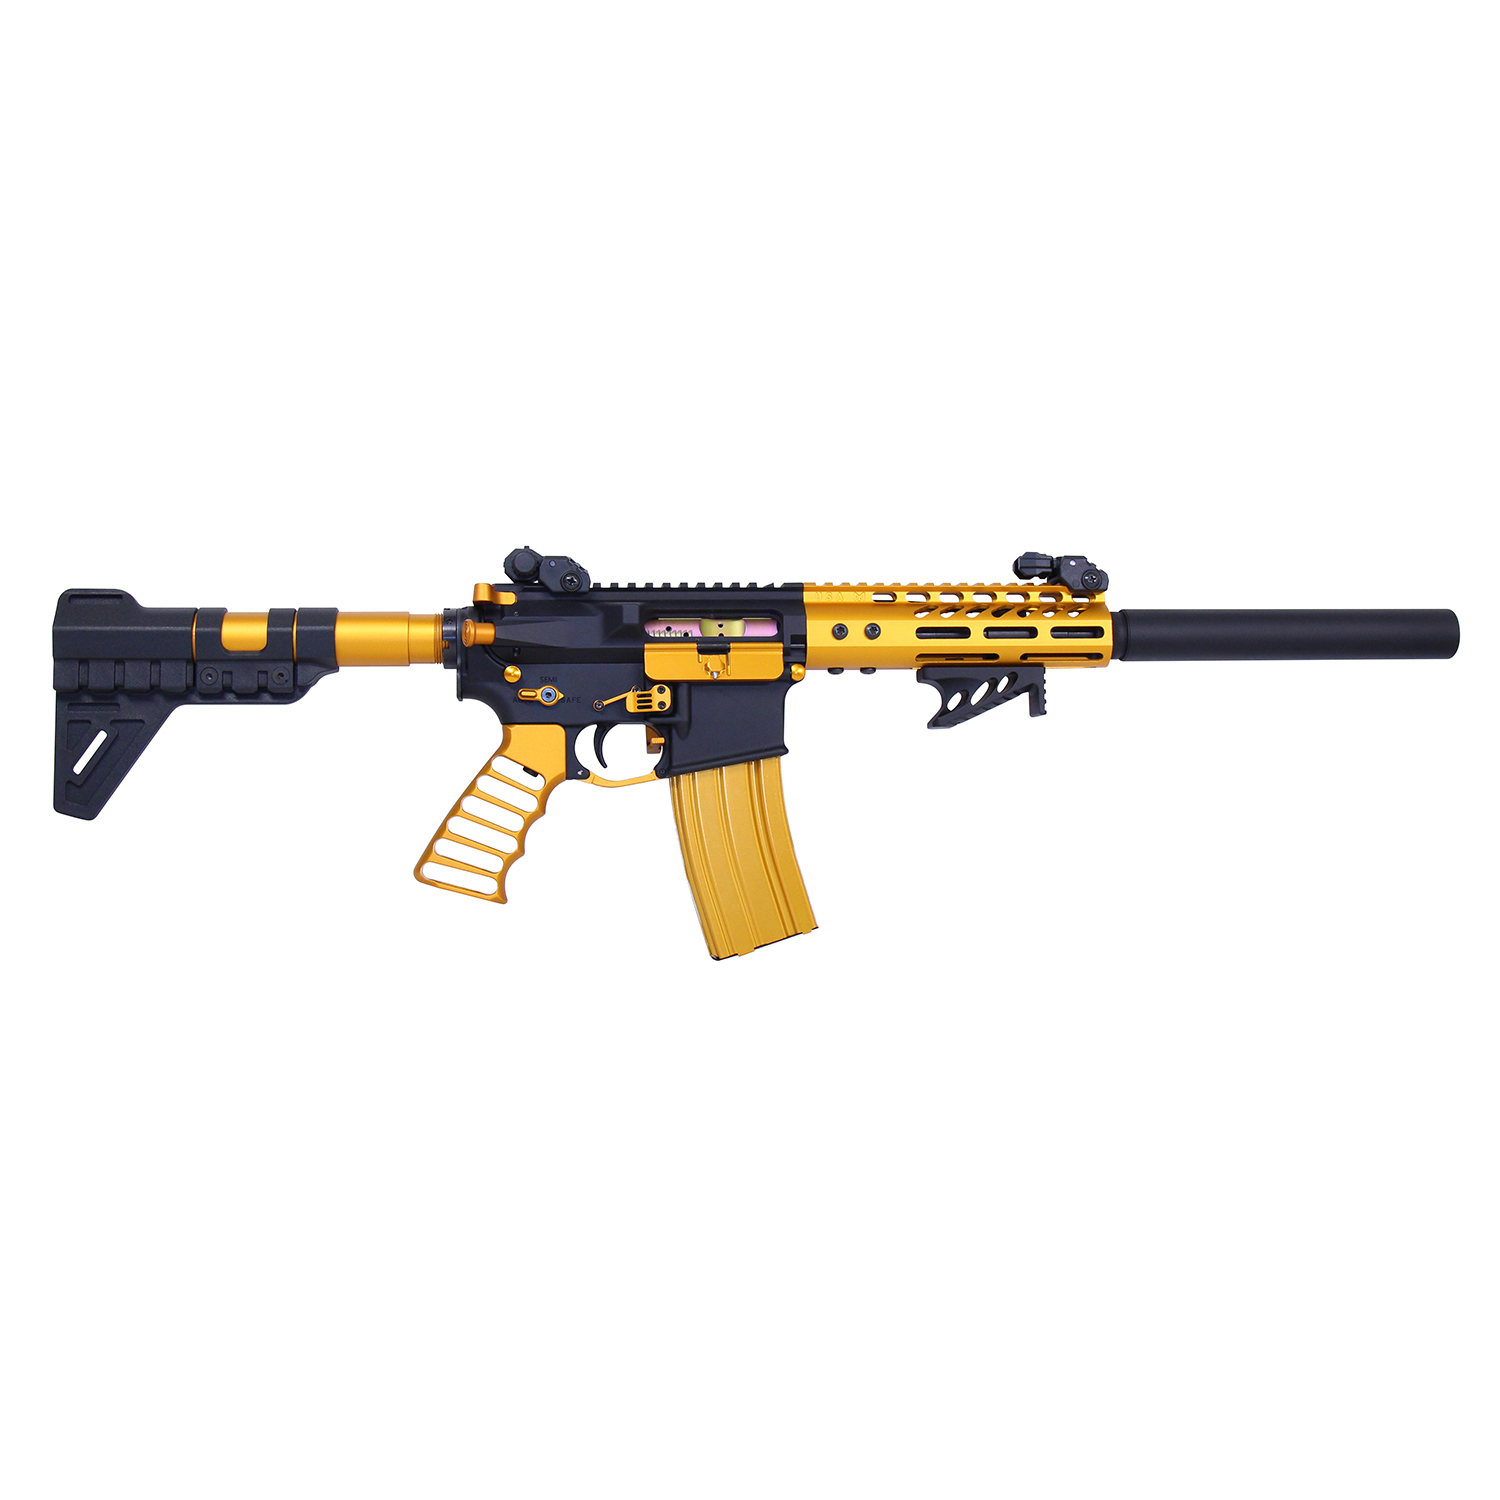 Custom AR-15 rifle with a 9-inch black mock suppressor and golden accents.